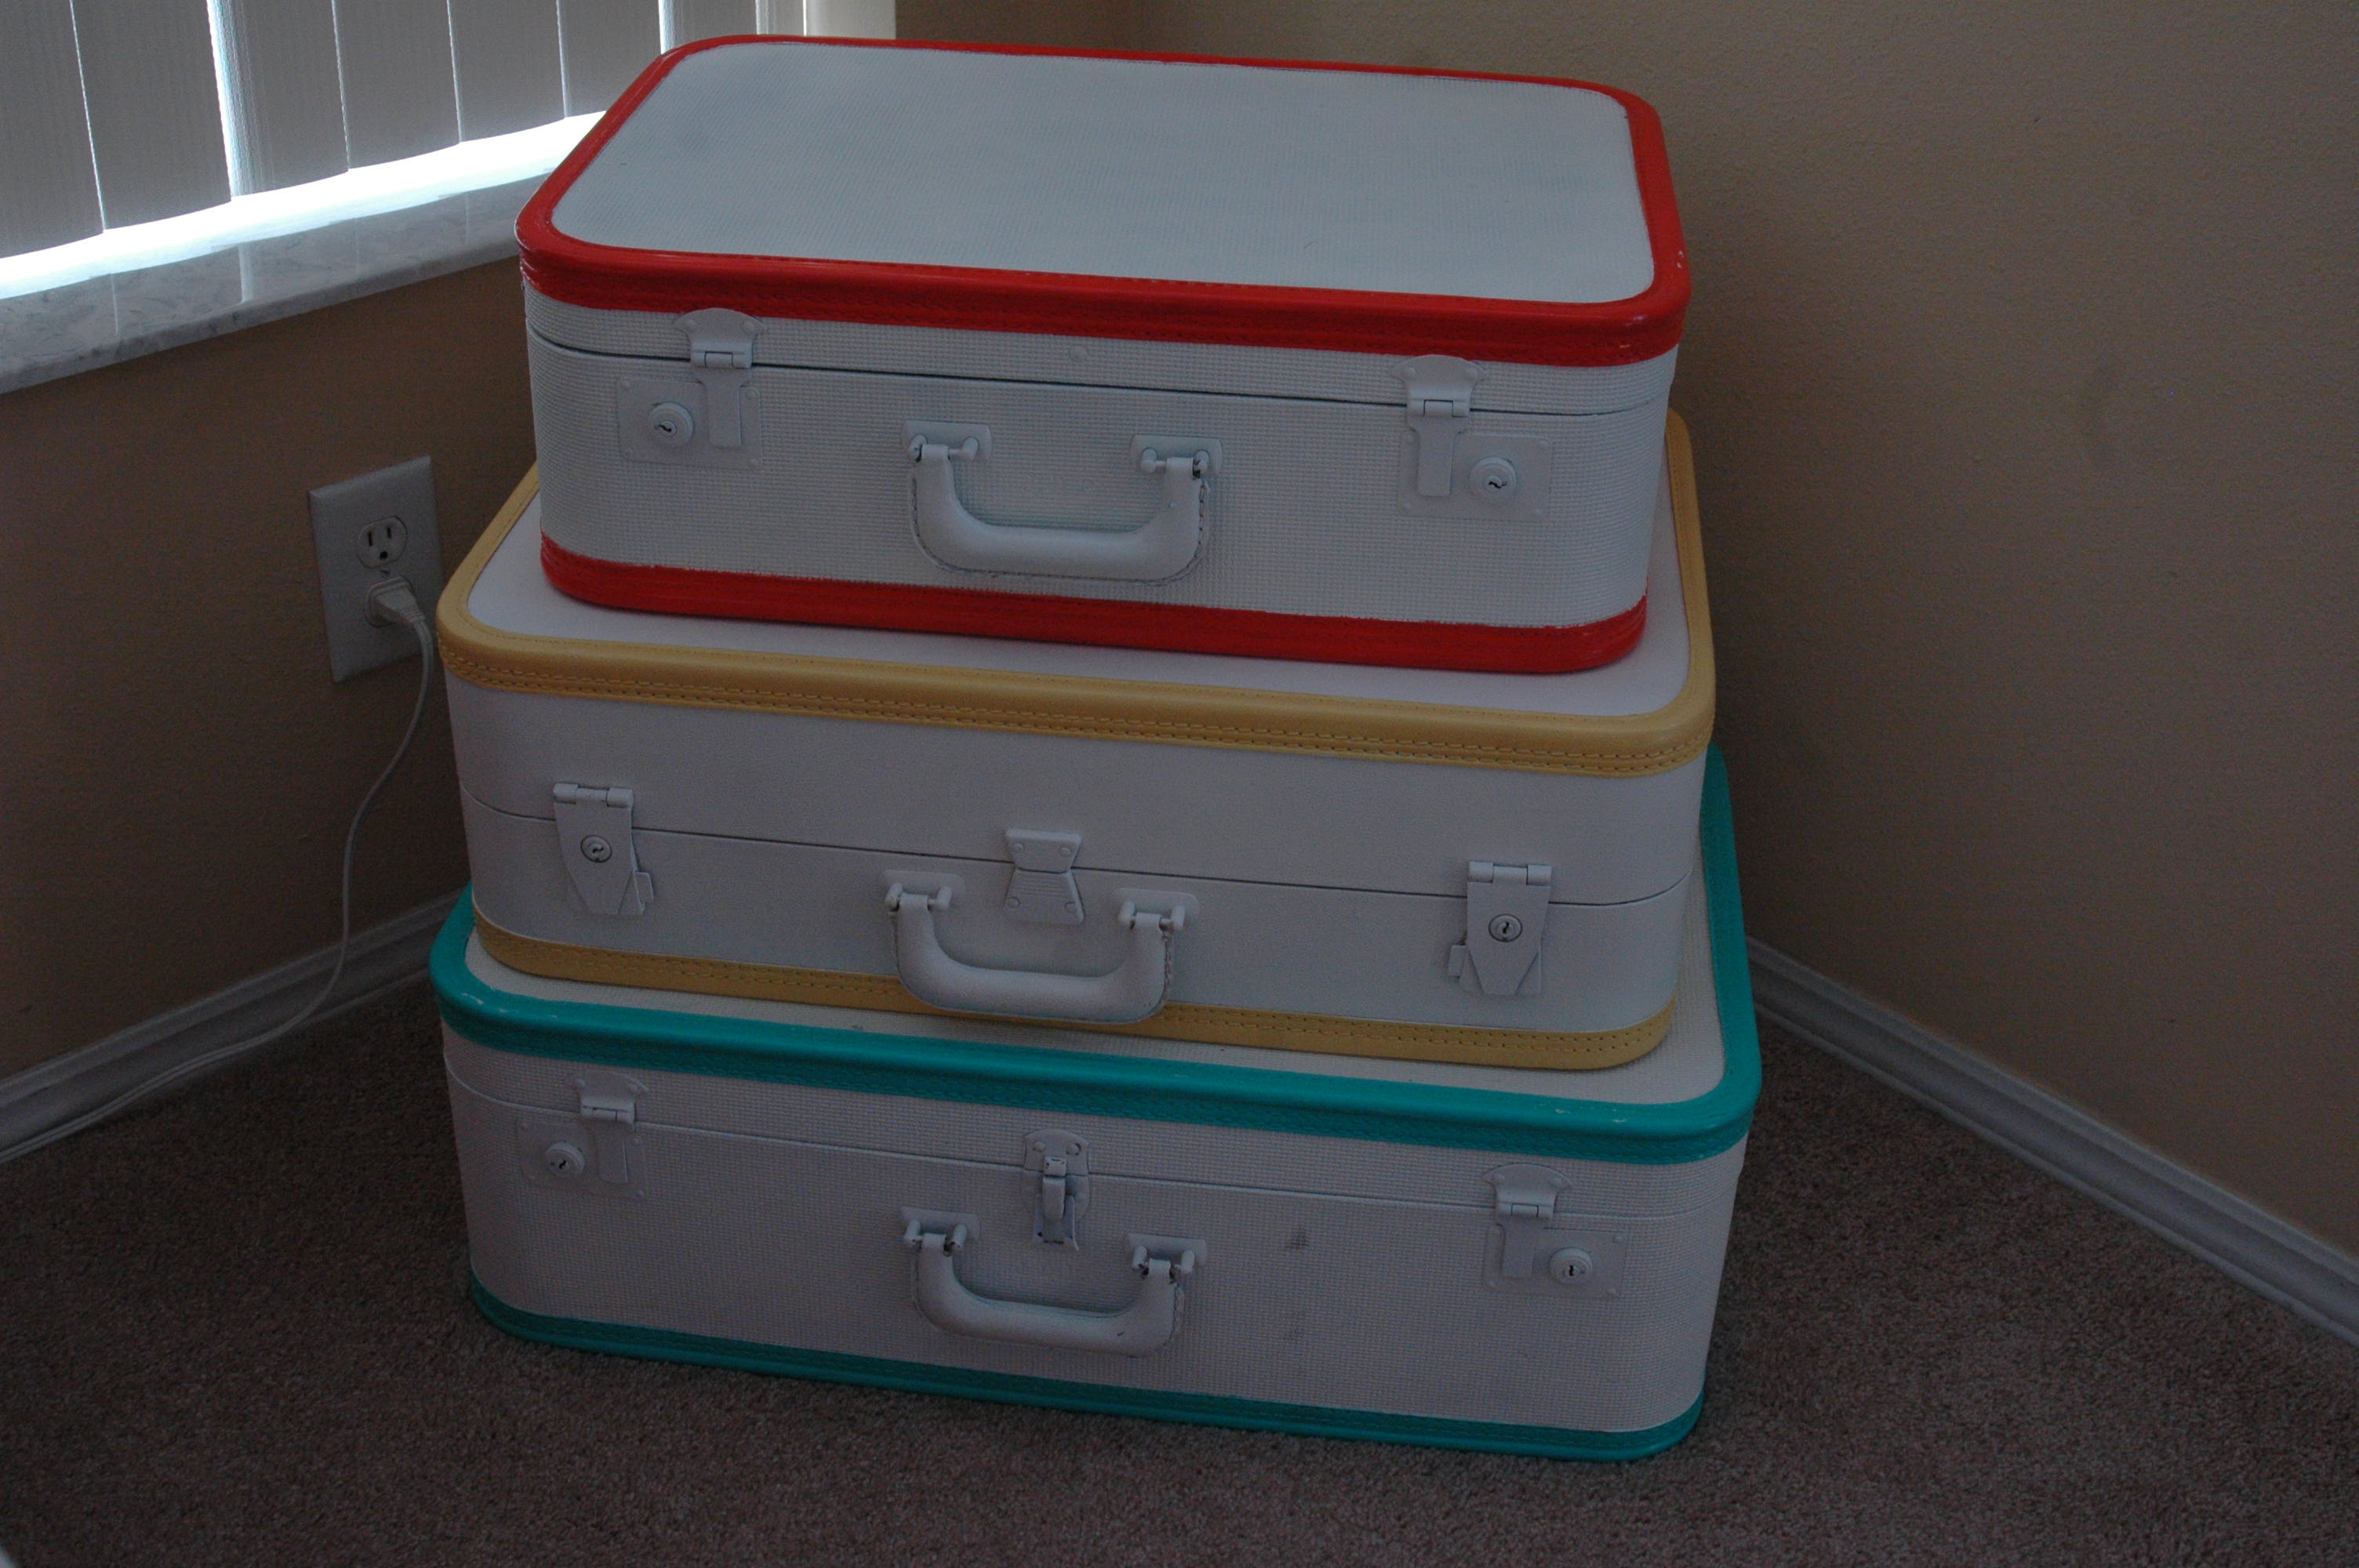 Thrifty Thursday - a new use for suitcases